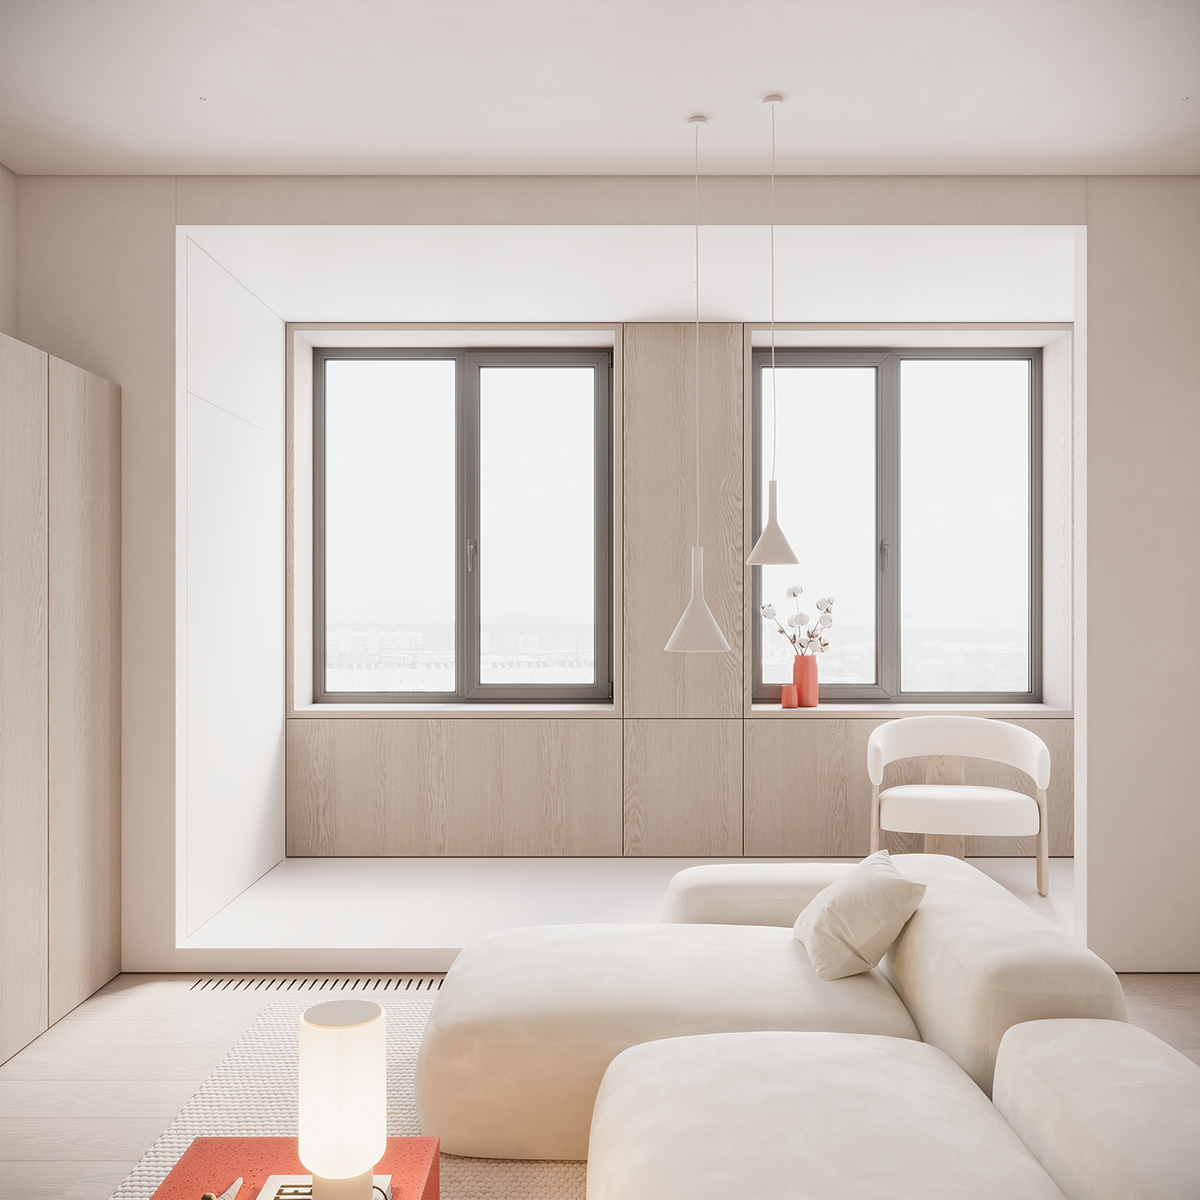 apartment Interior 3ds max architecture visualization ArchiCAD Moscow flat flat design